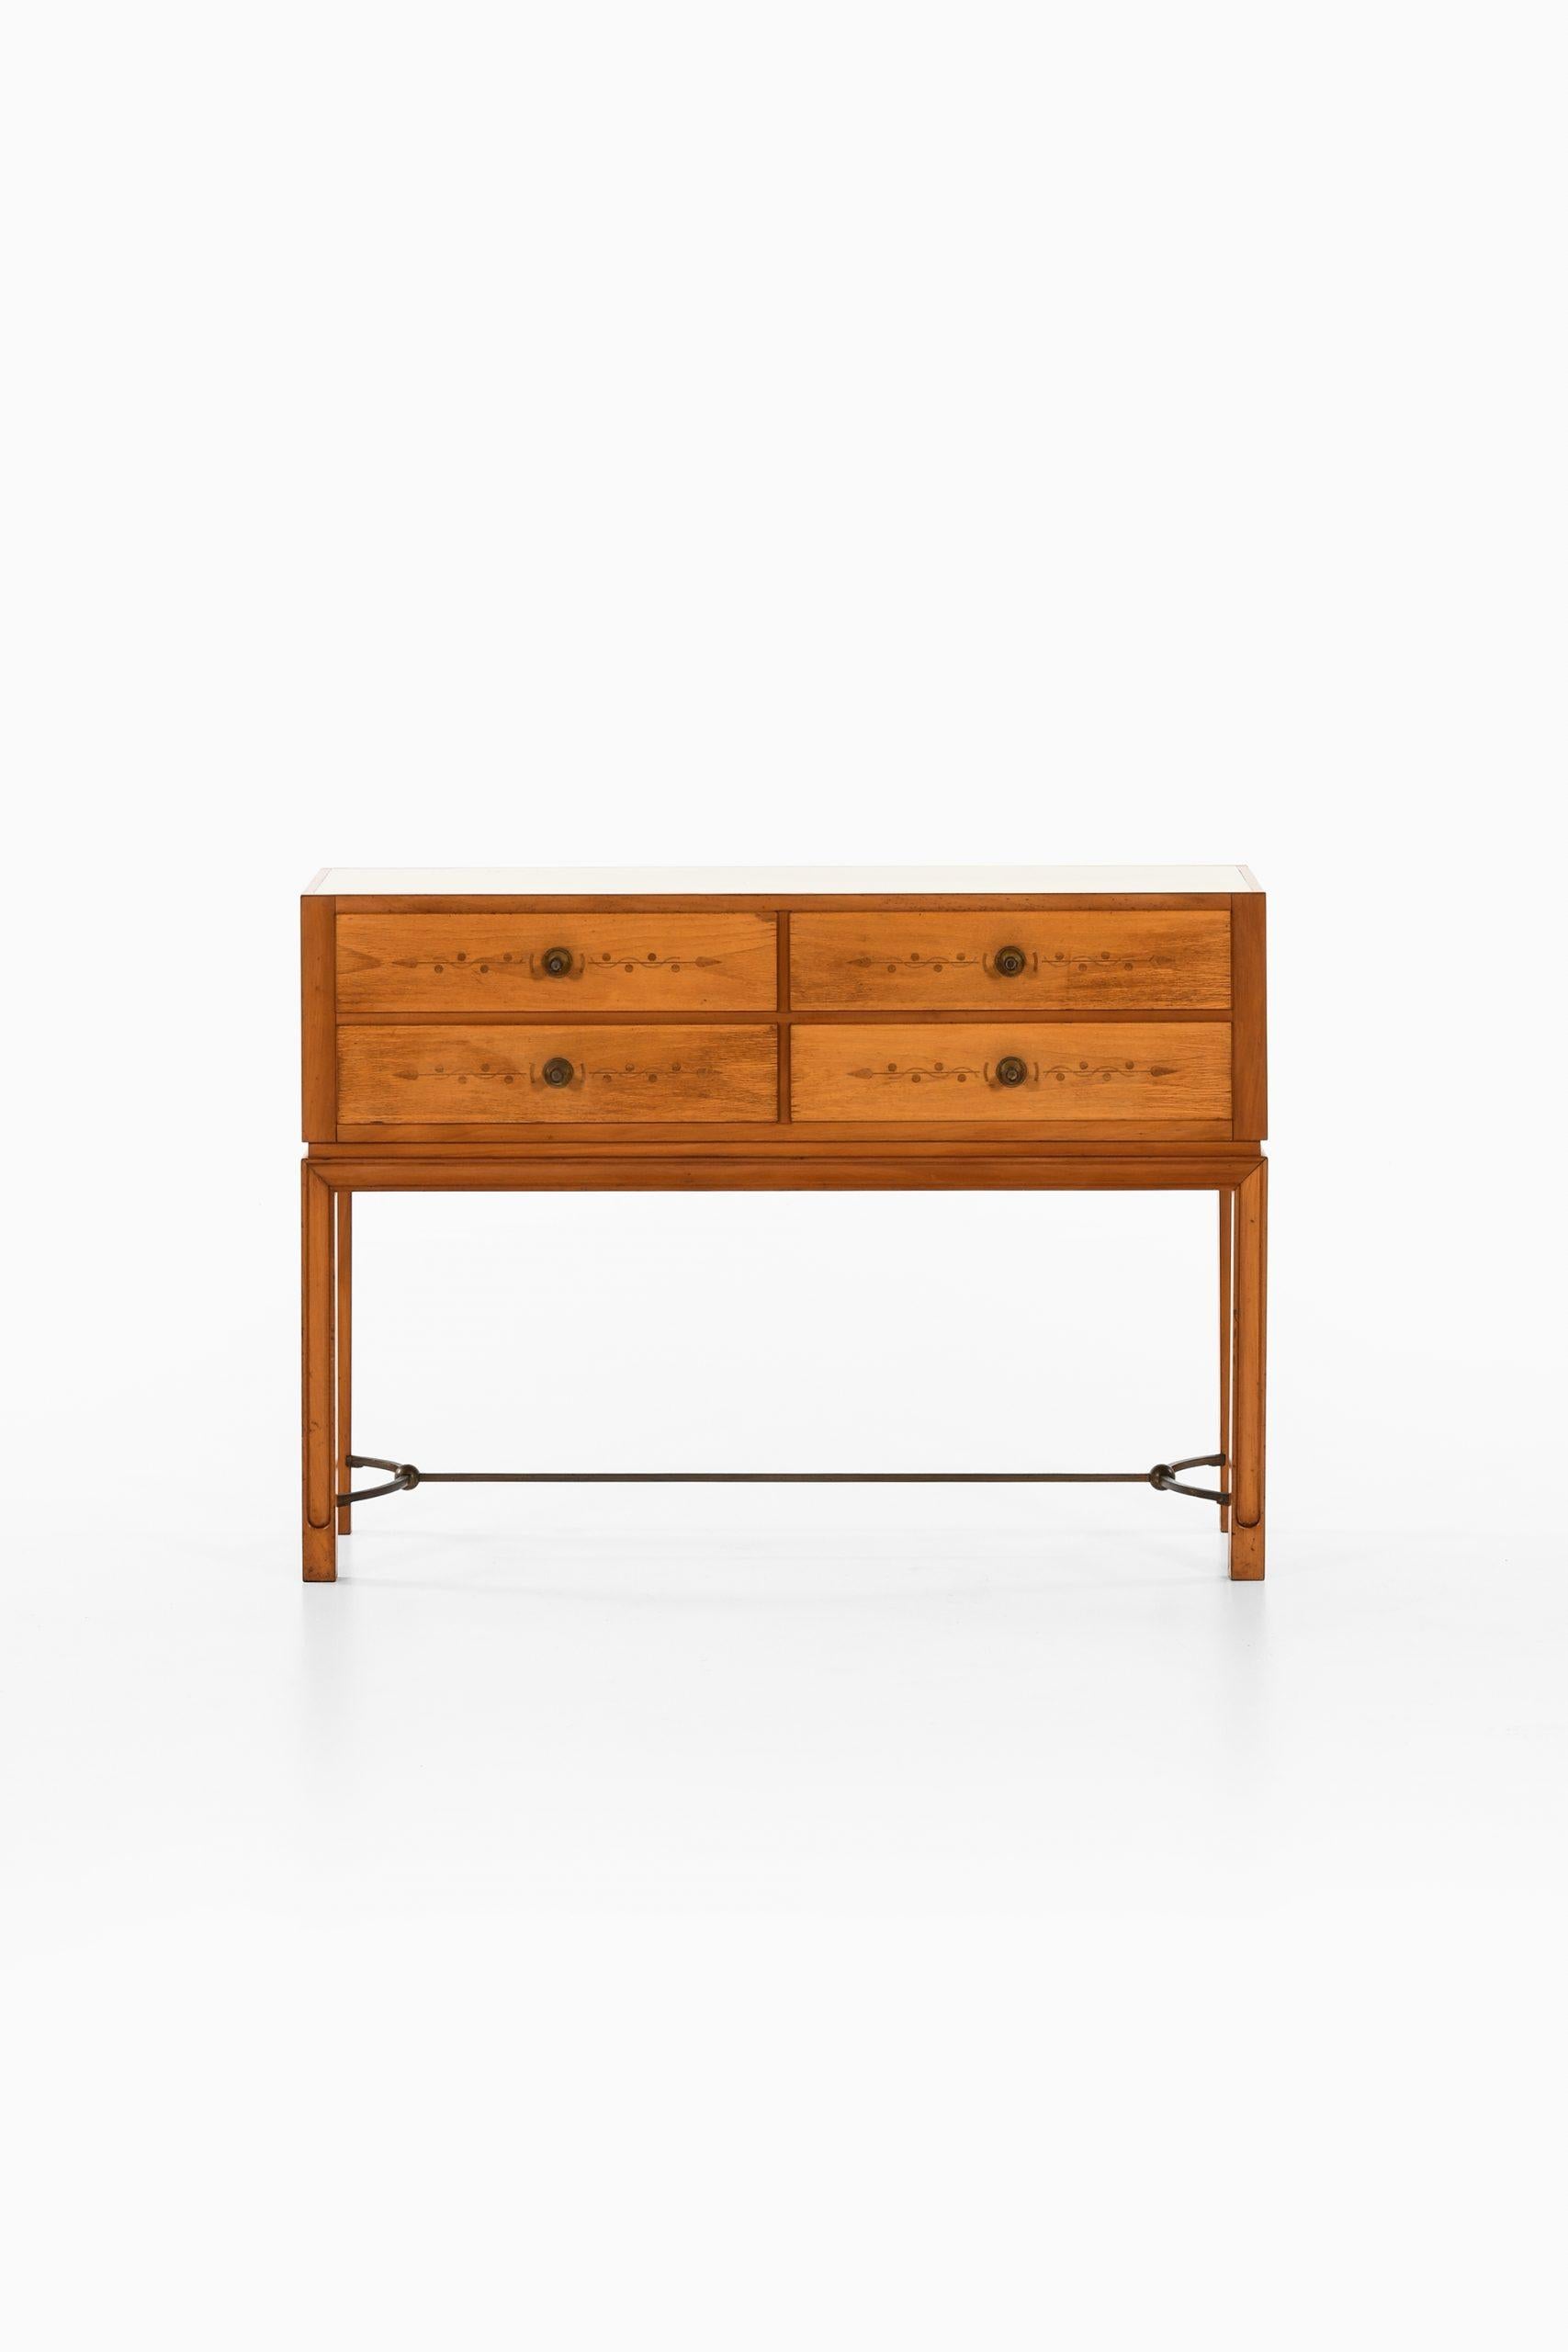 Rare sideboard / console table by unknown designer.